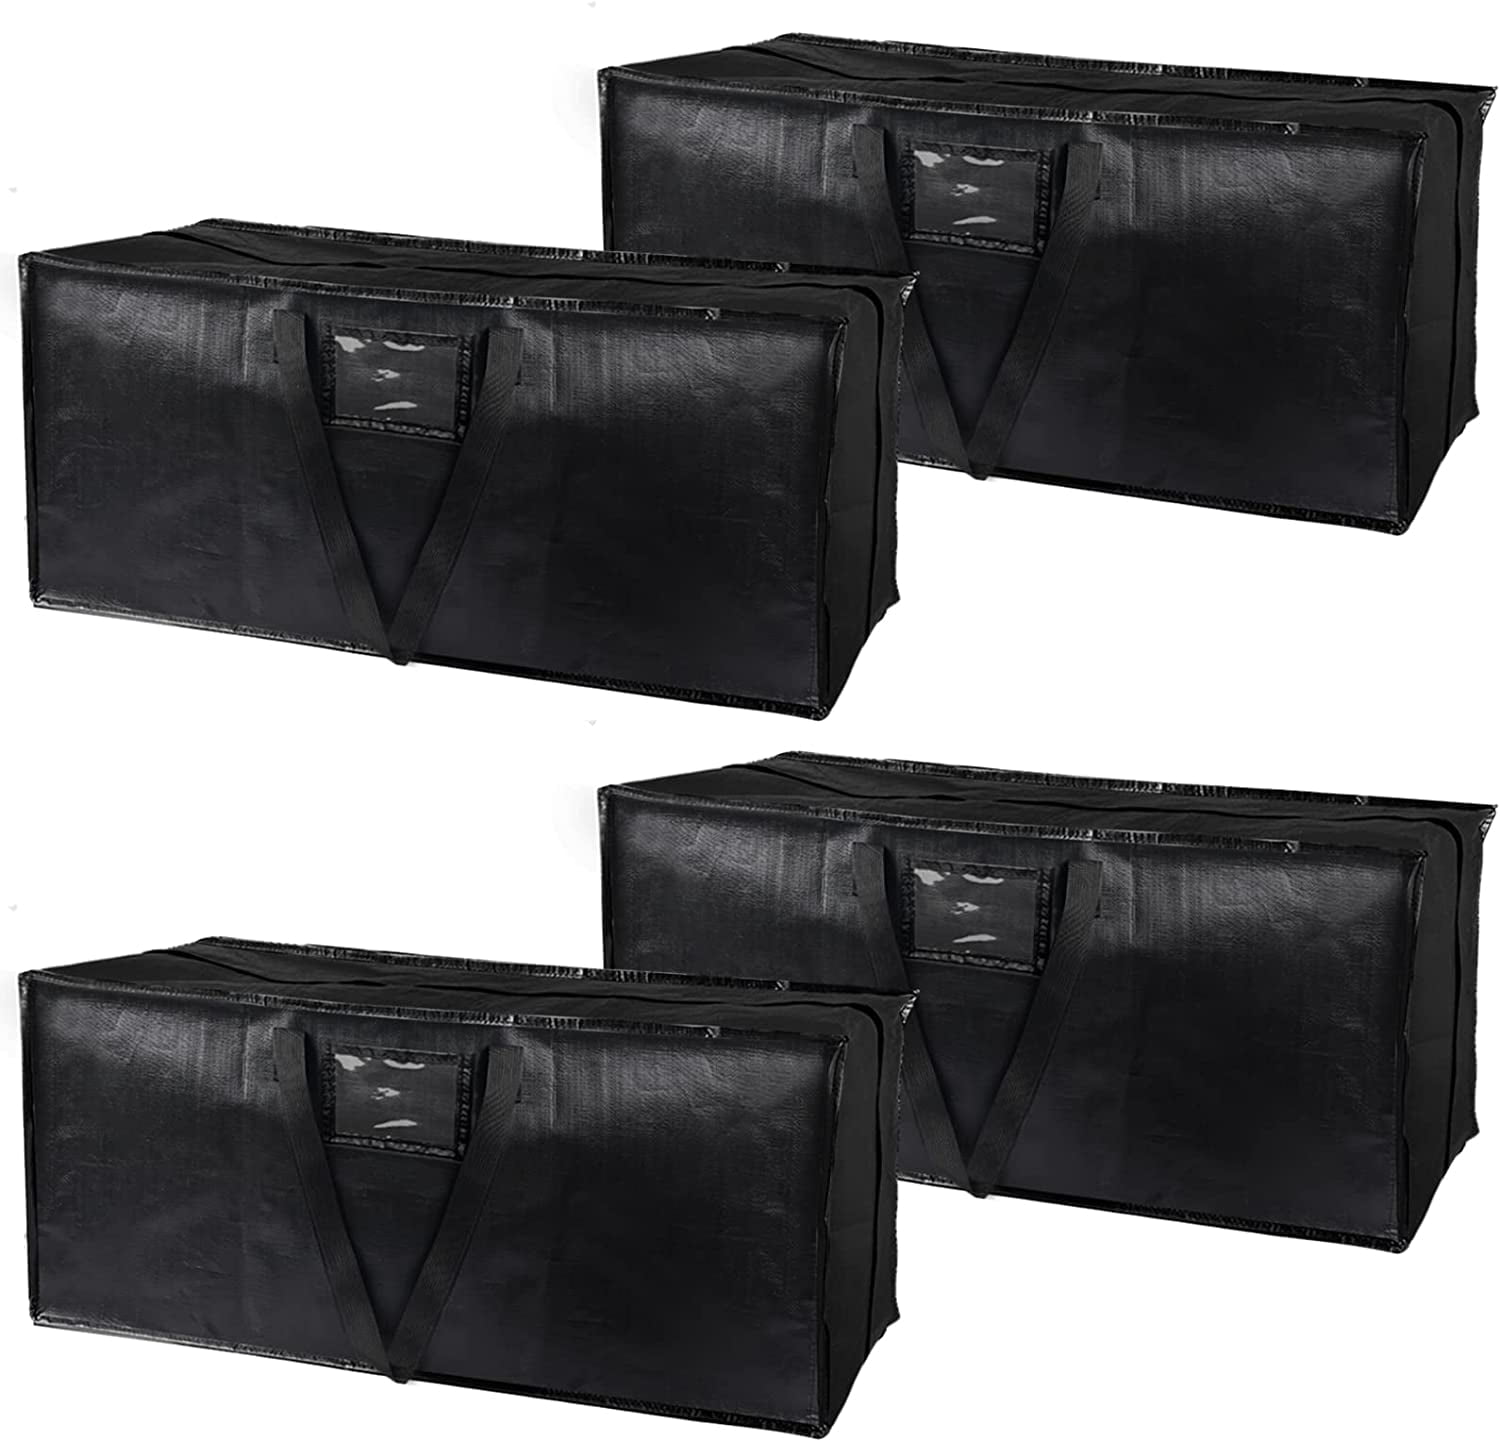 Laidan 4pcs 110L Extra Large Storage Bag, Waterproof Heavy Duty Big Clothe Storage Bags Boxes with Zippers for Moving, Travelling, Underbed, Garden, Christma